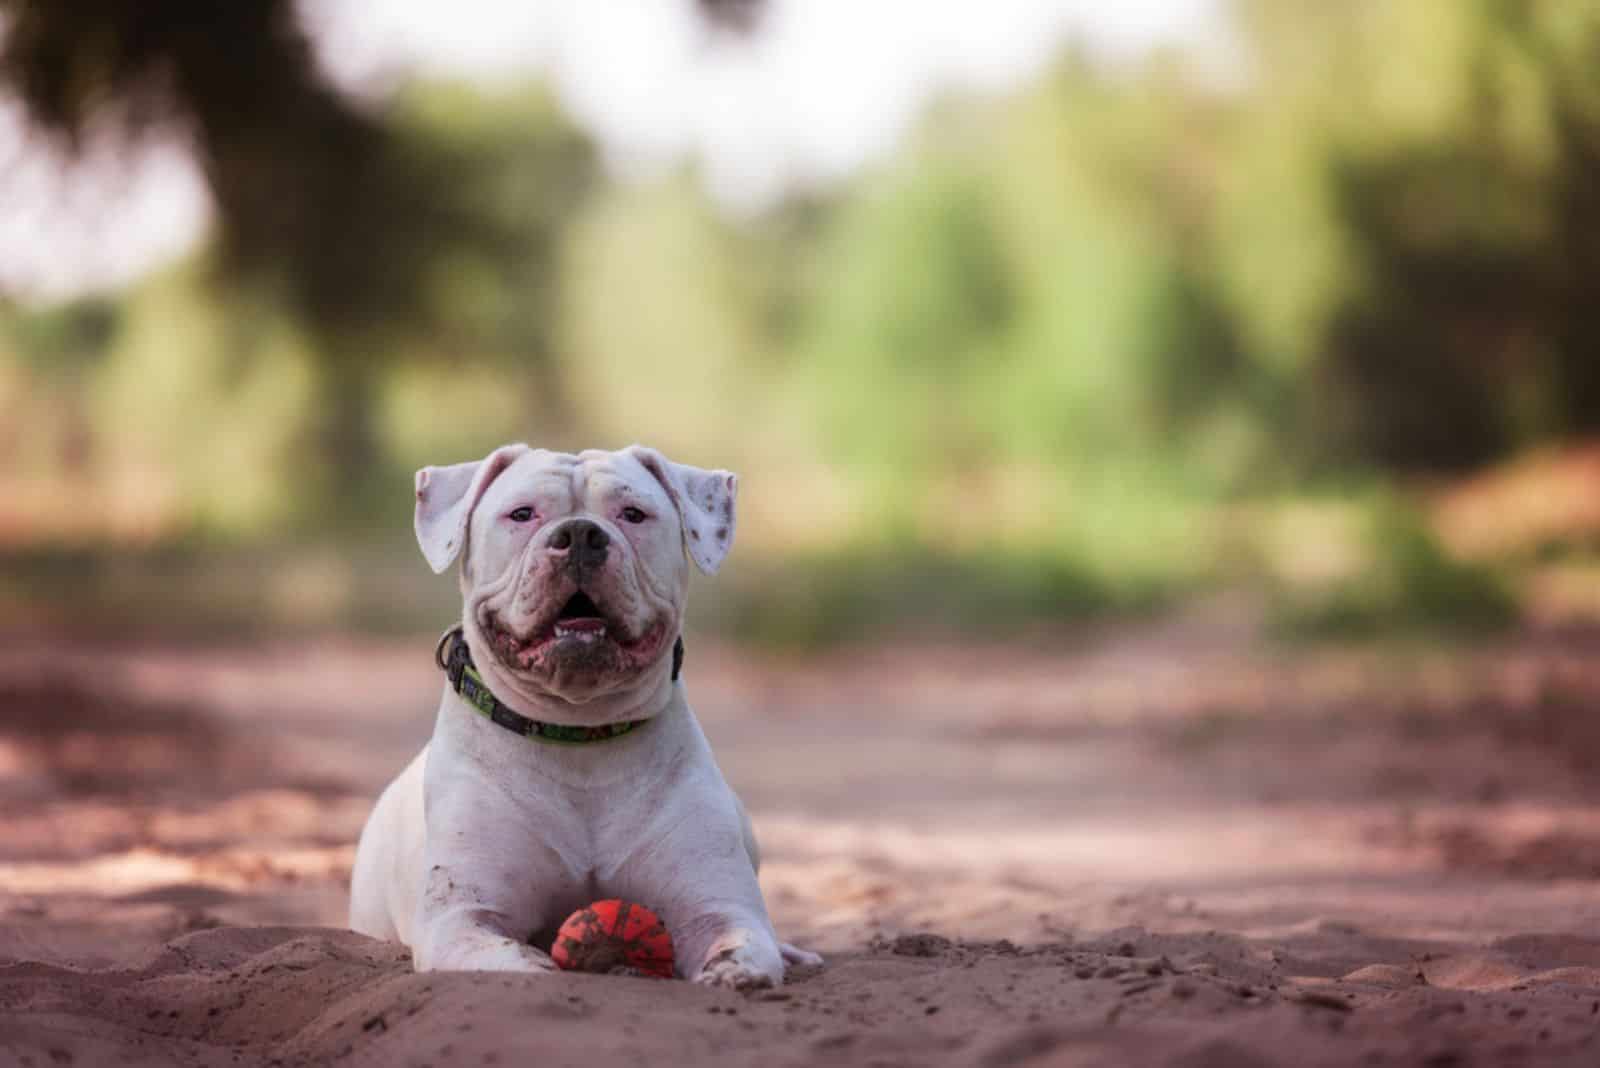 American bulldog lies on the sand with the ball